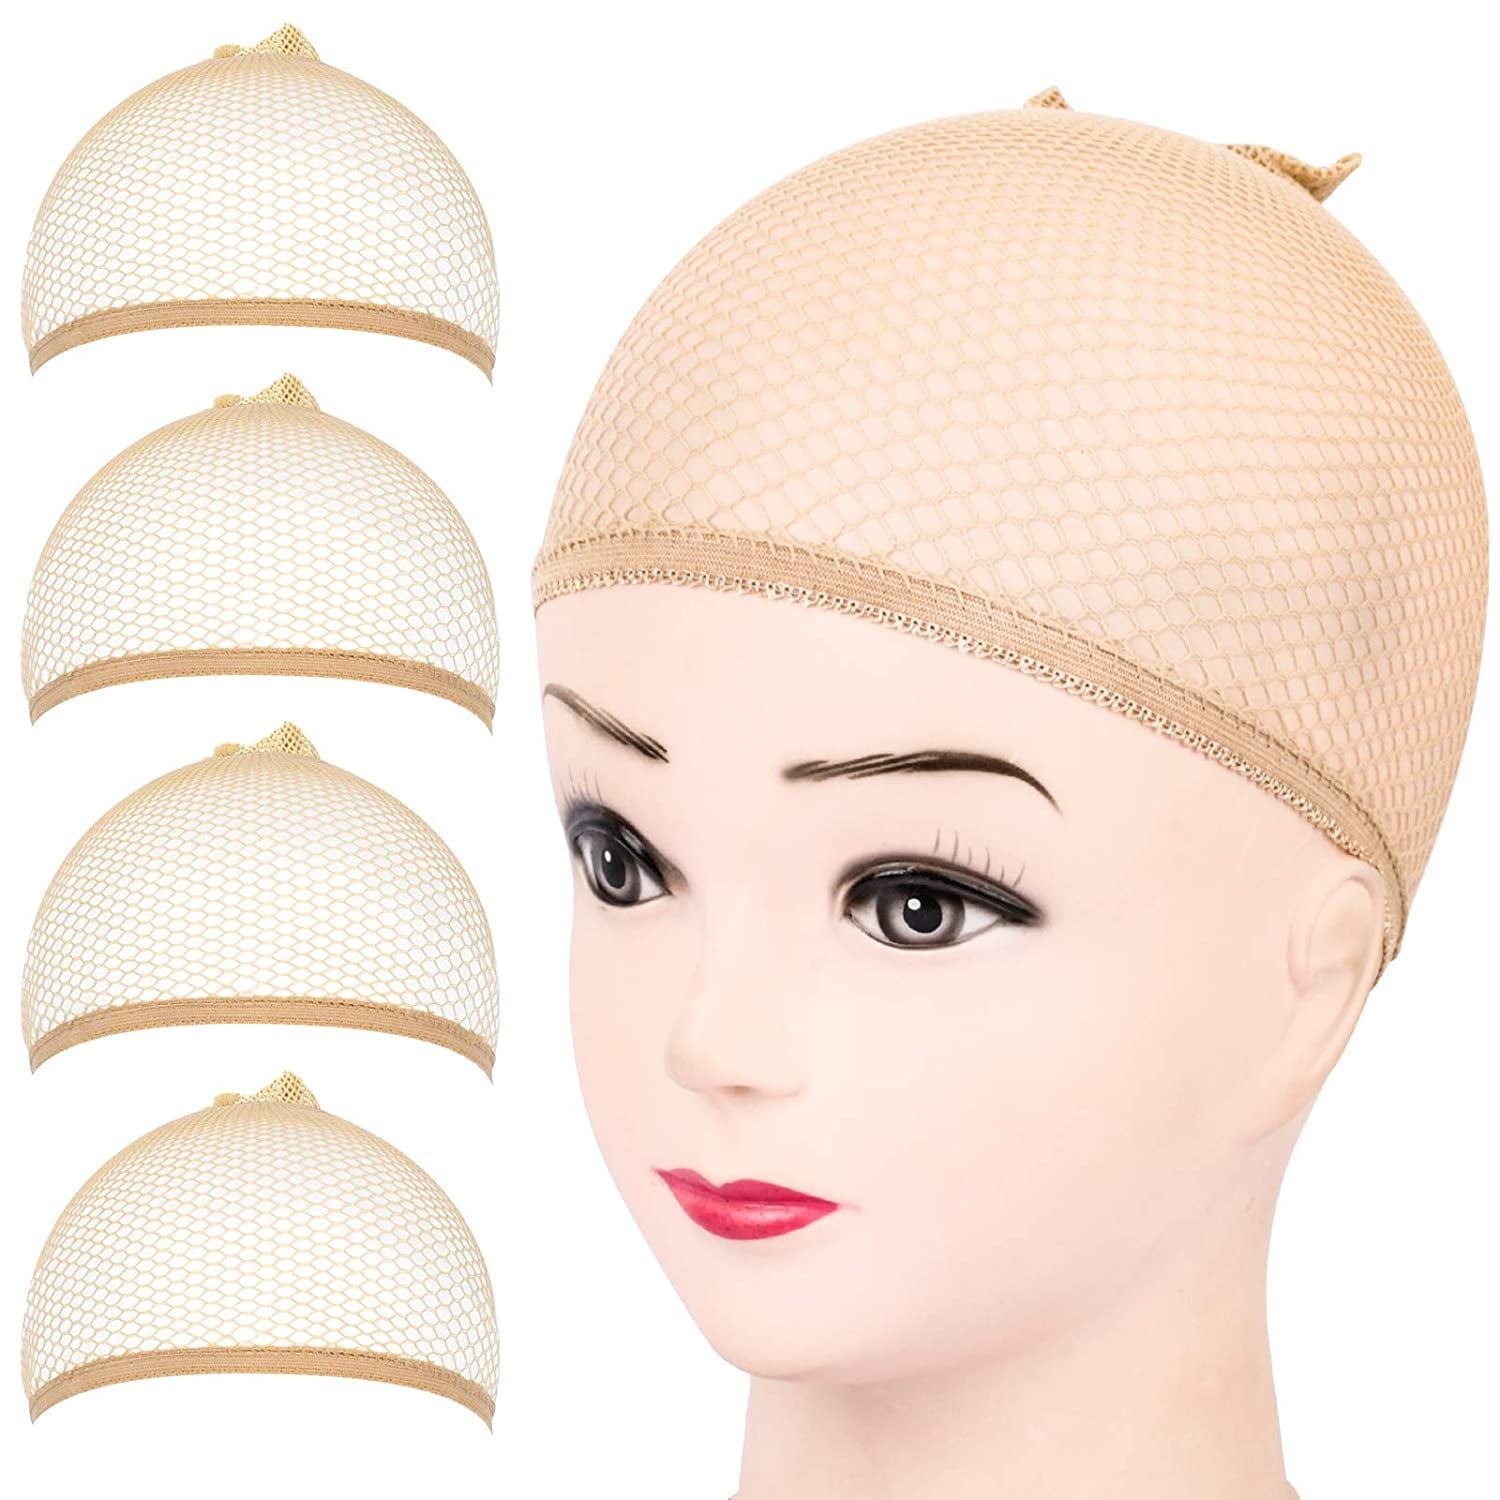 Machine Made Wig Cap Mesh Wig Weaving Caps for Synthetic Wigs Medium Size 